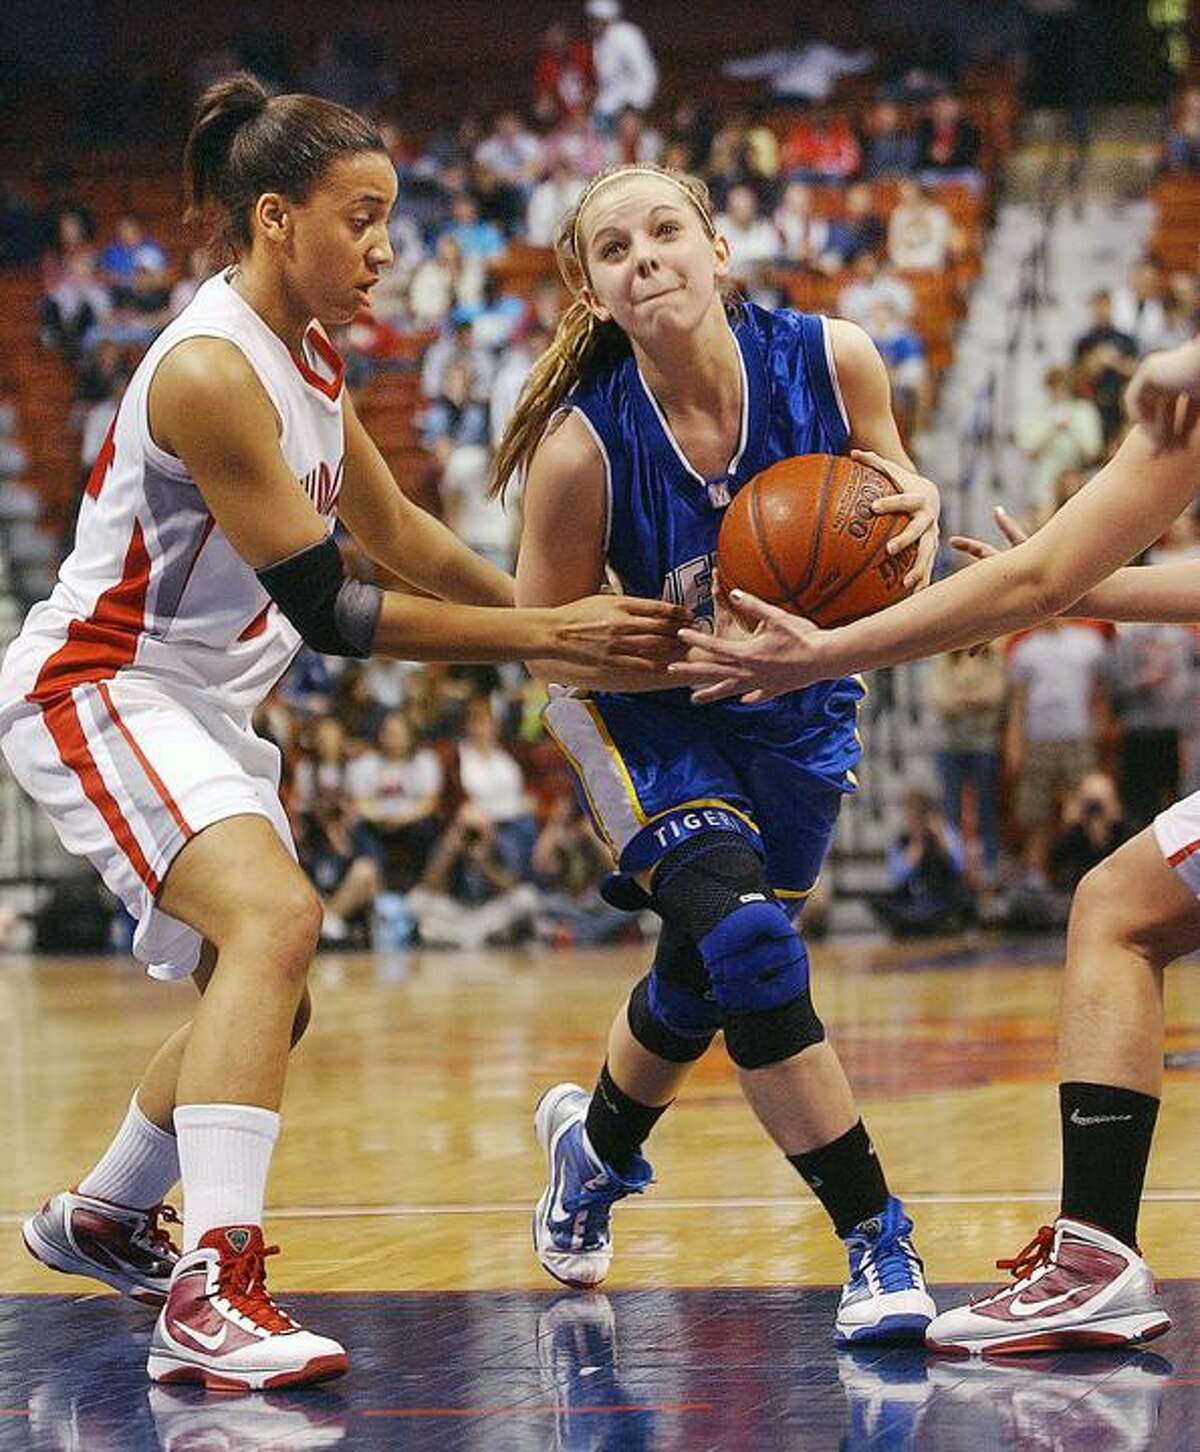 Mercy's Amber Bepko drives the lane against Norwich Free Academy in the Class LL state championship at Mohegan Sun. (Catherine Avalone / Middletown Press)